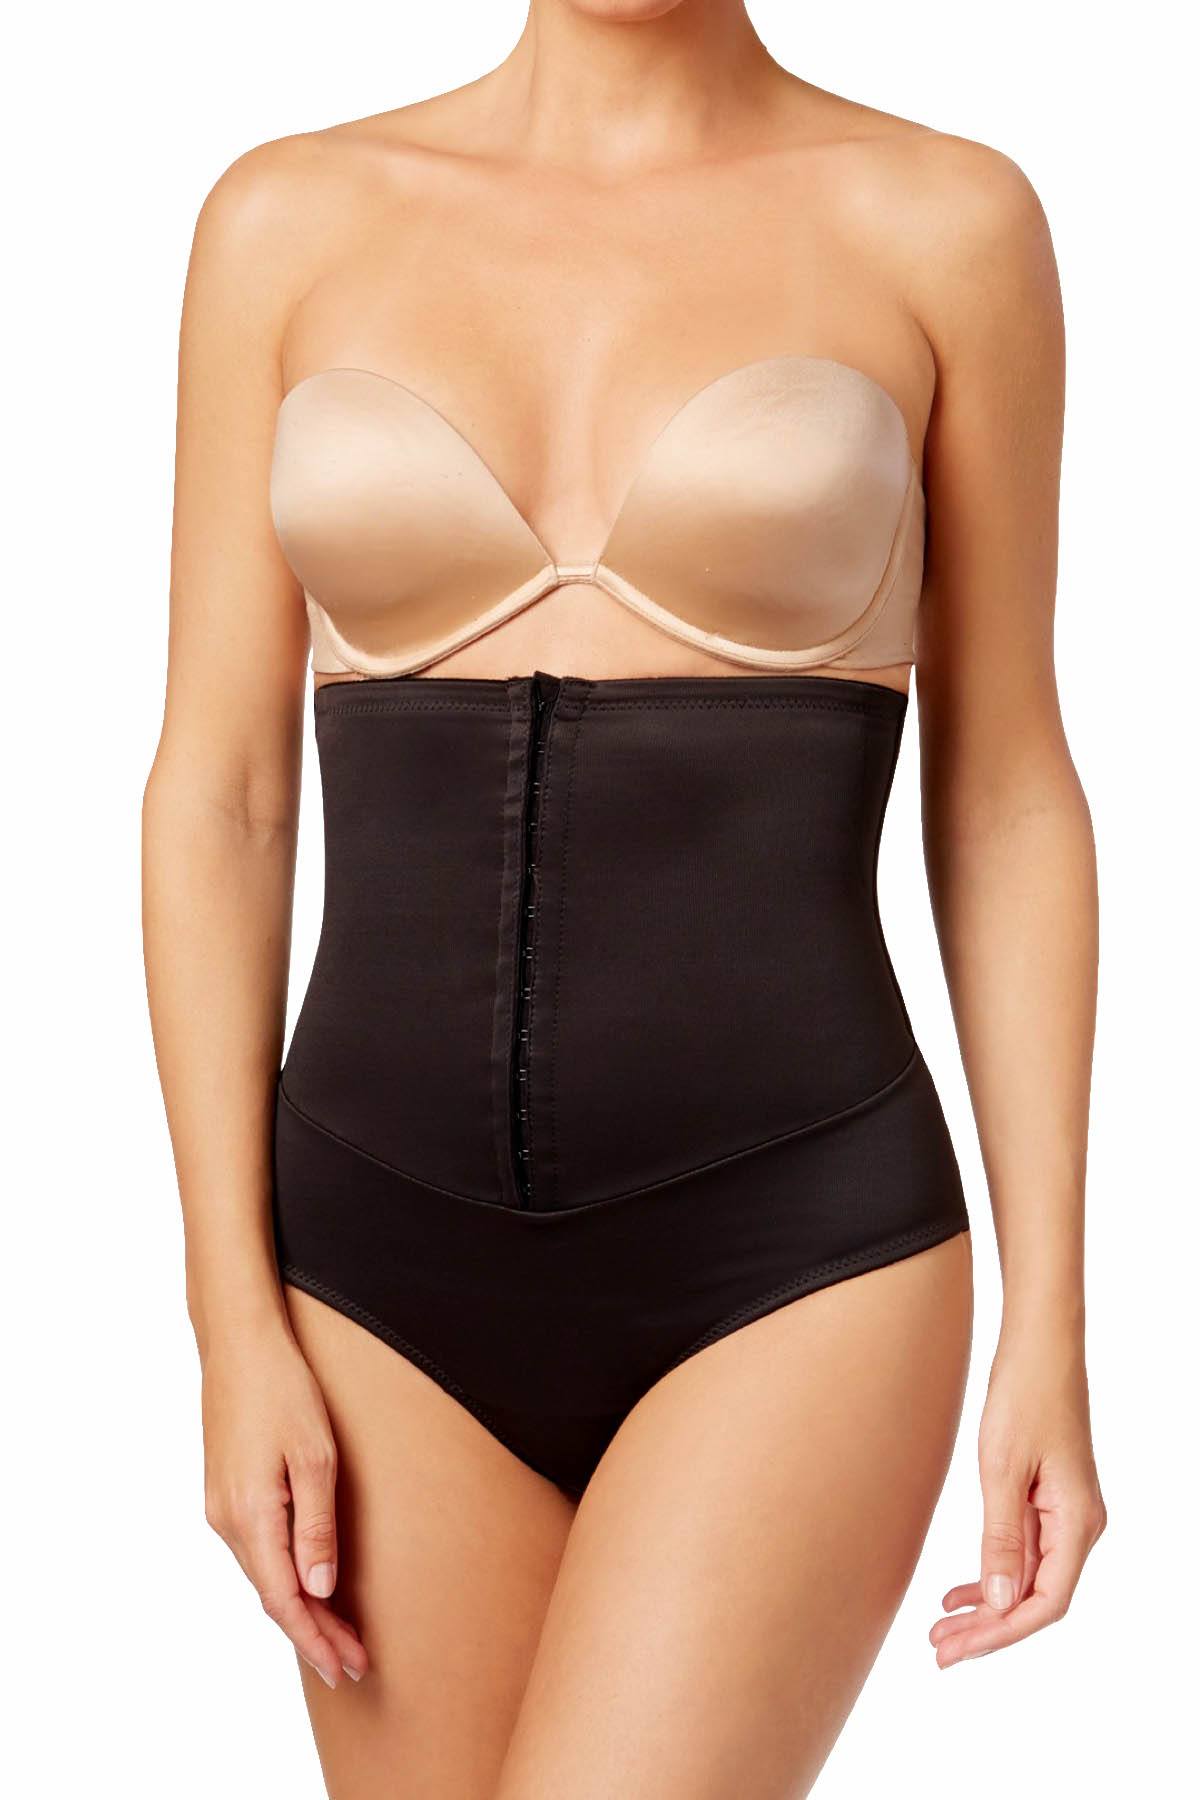 Shapewear - Miraclesuit Inches Off Waist Cincher- Black